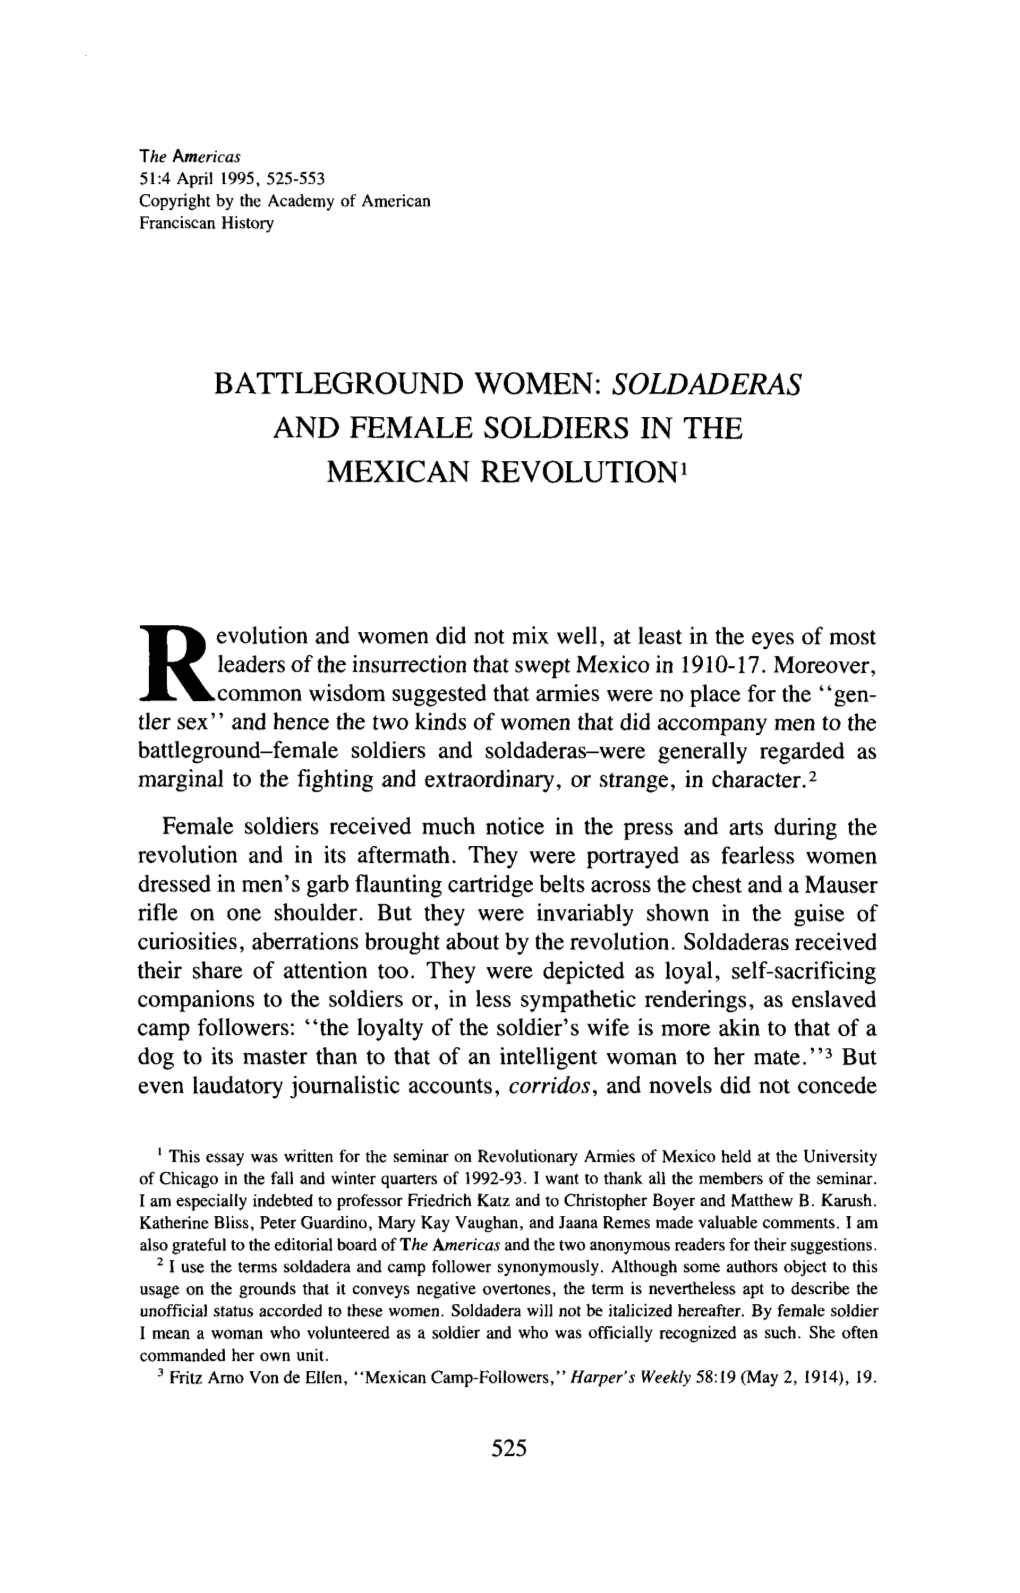 Revolution and Women Did Not Mix Well, at Least in the Eyes of Most